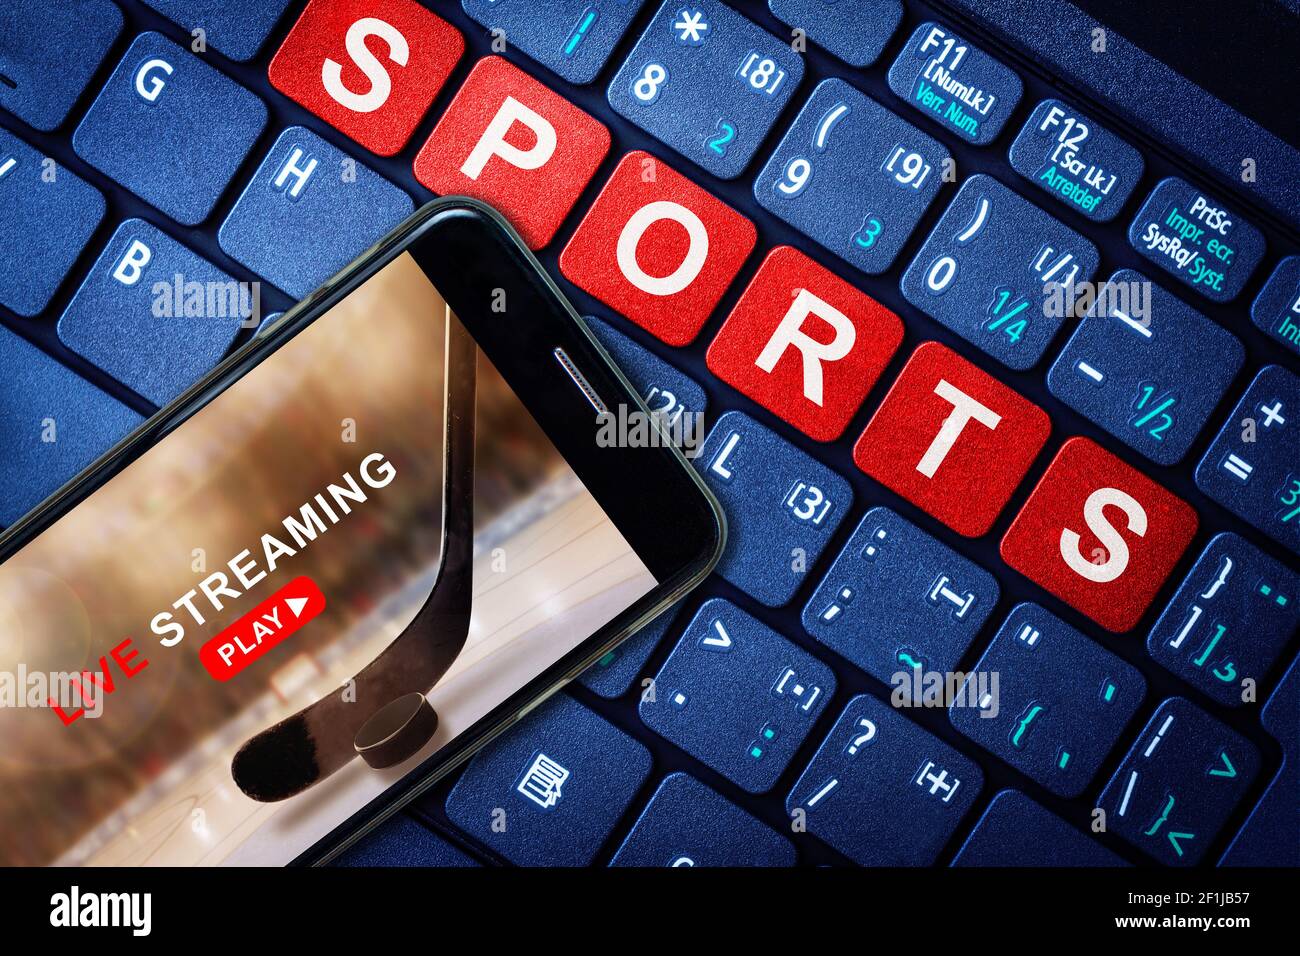 Sports Live streaming concept showing ice hockey game broadcast on smartphone with laptop high tech background. Accessible on demand digital content i Stock Photo